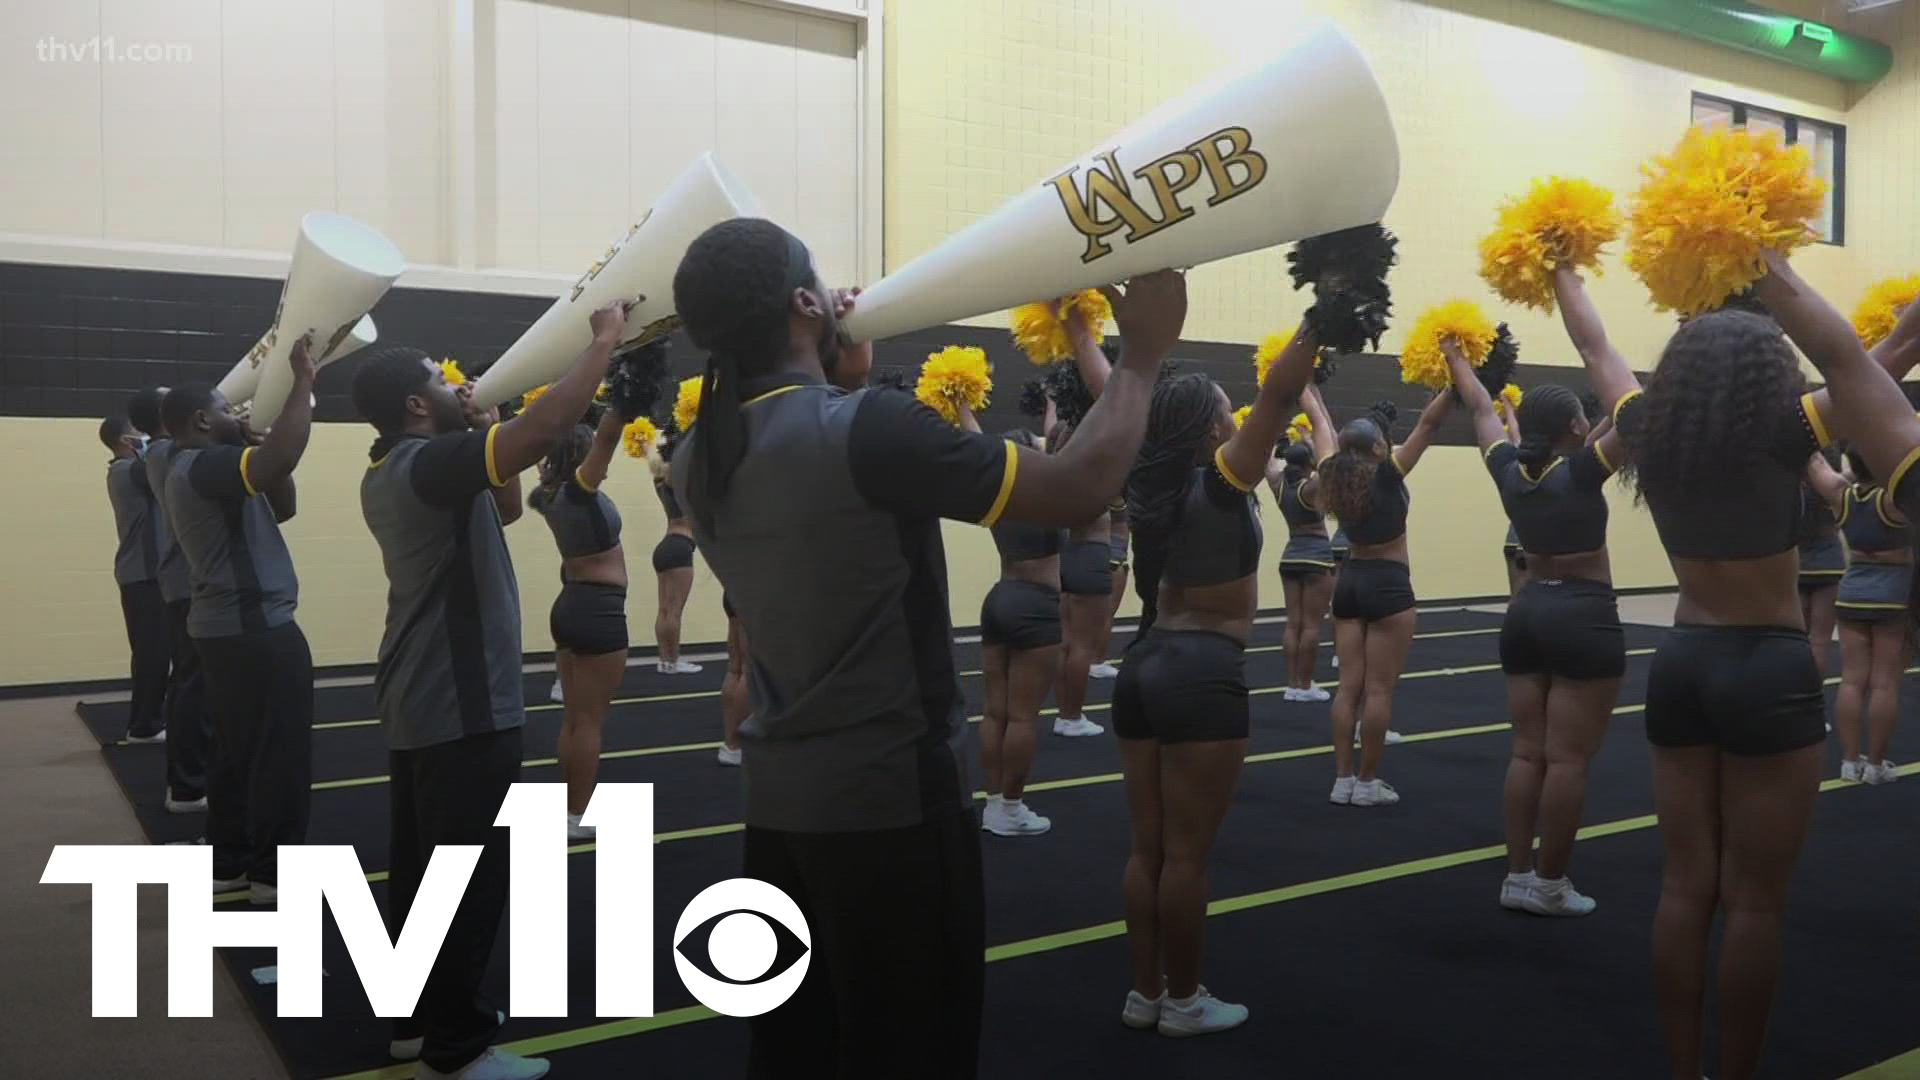 The University of Arkansas at Pine Bluff (UAPB) spirit squad has 75 members this year and everyone is fully vaccinated.